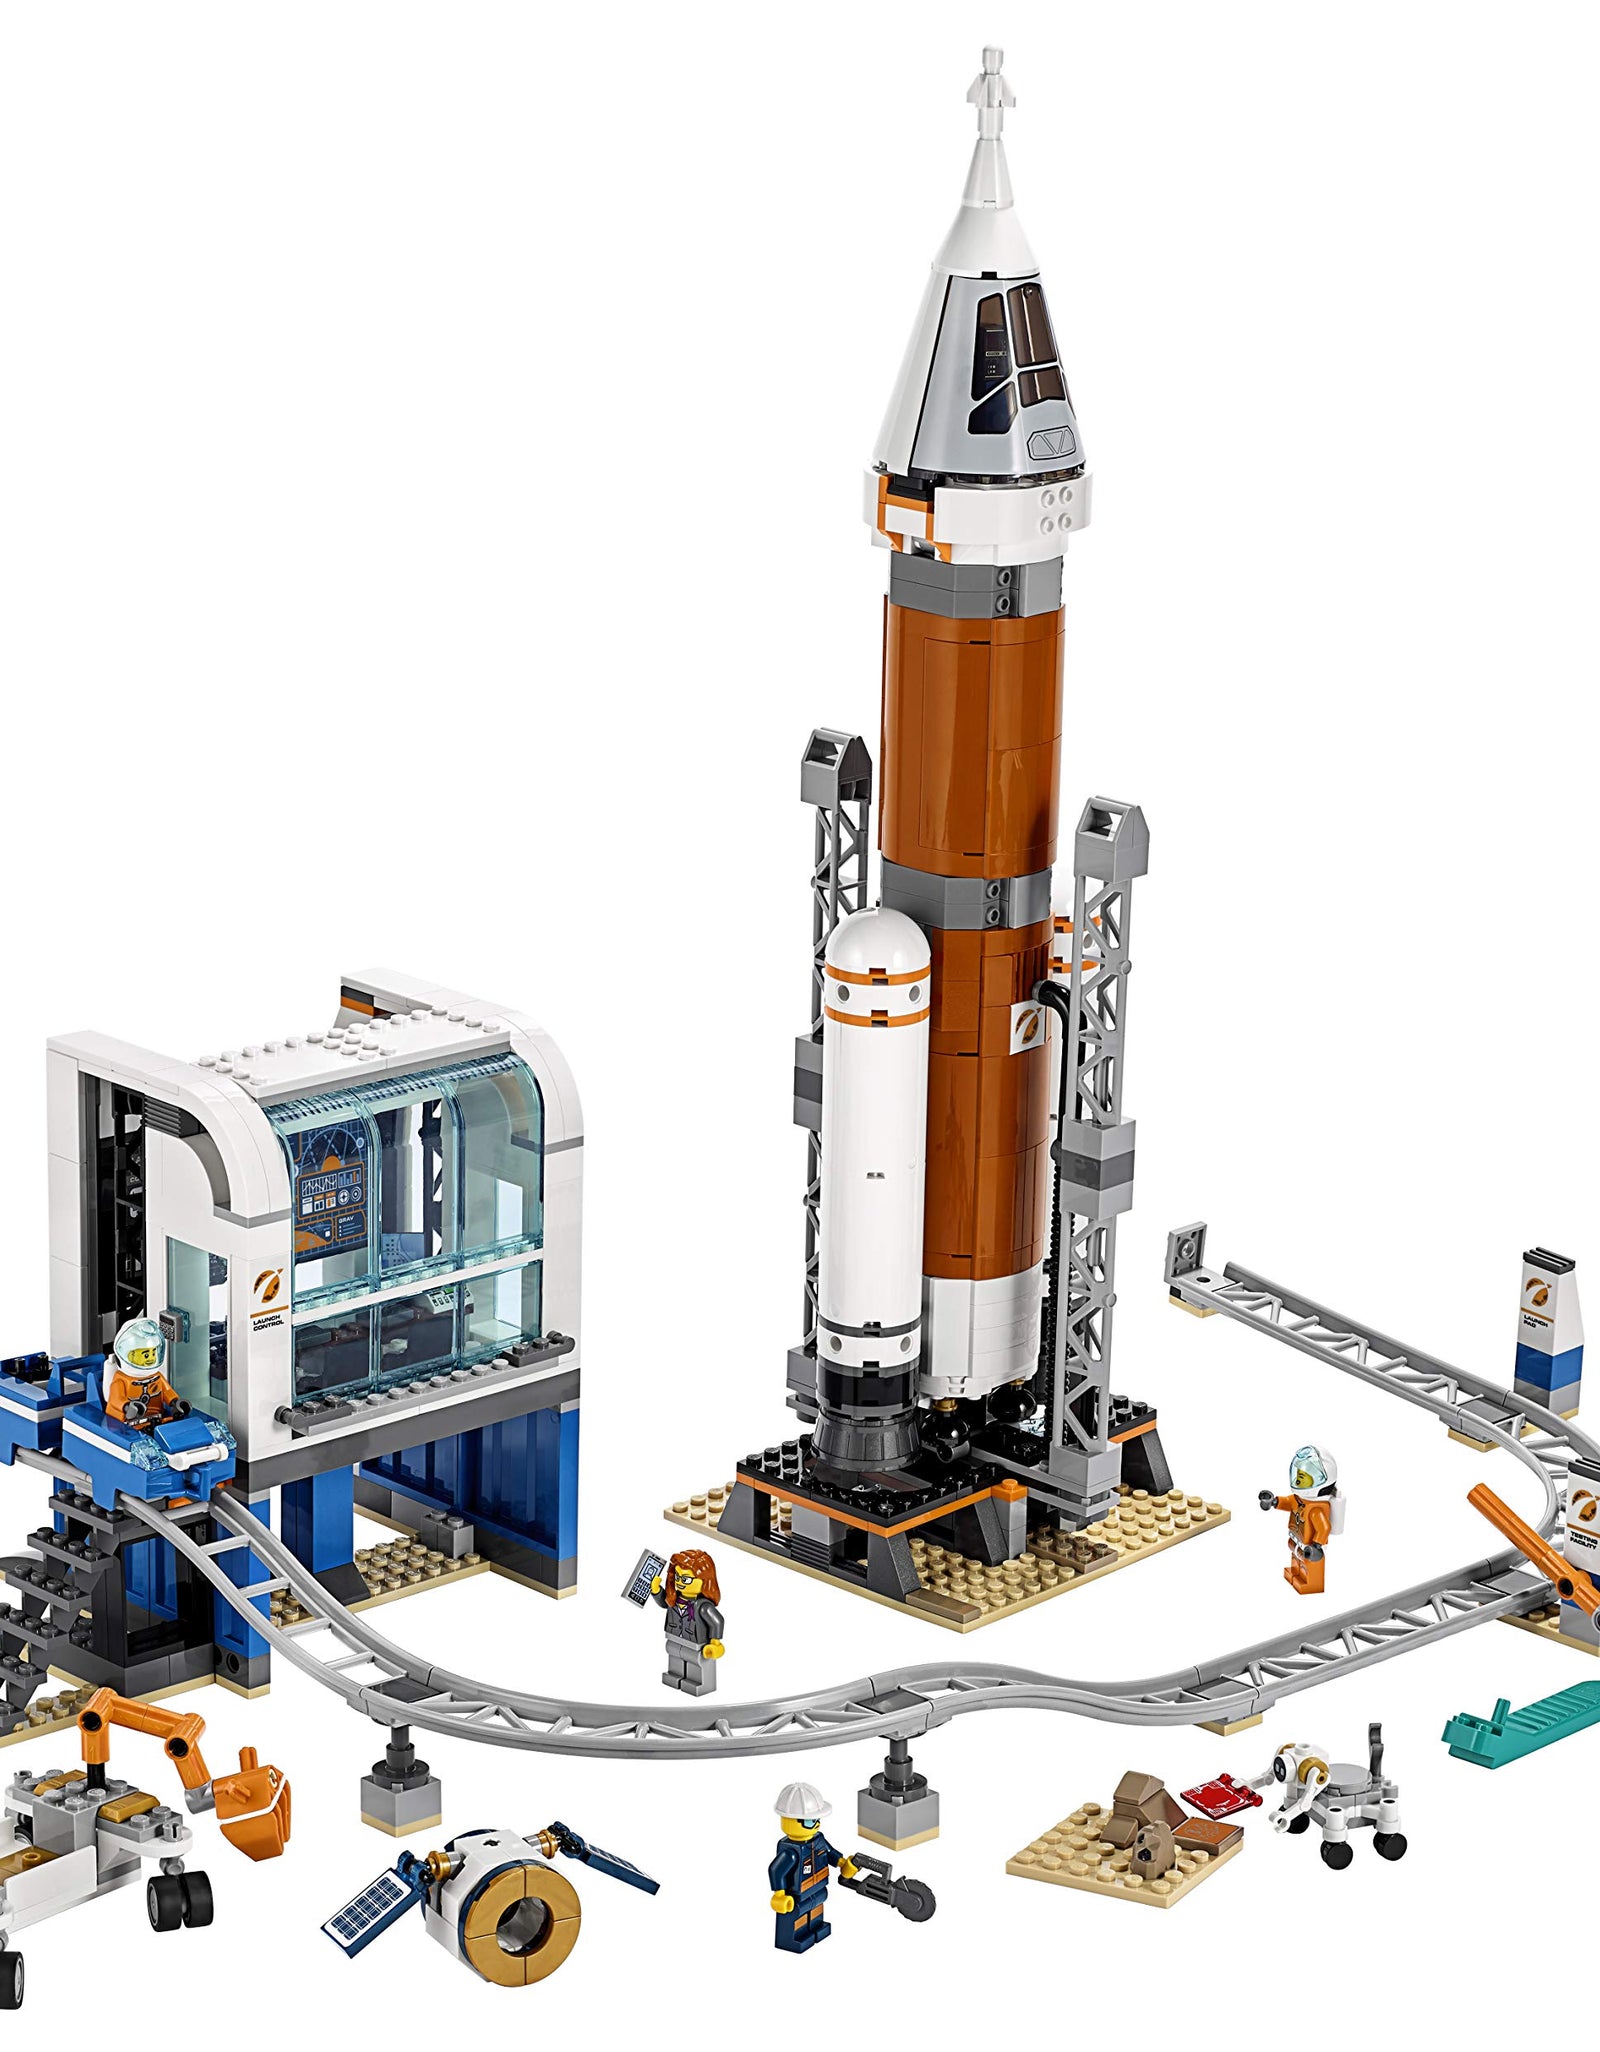 LEGO City Space Deep Space Rocket and Launch Control 60228 Model Rocket Building Kit with Toy Monorail, Control Tower and Astronaut Minifigures, Fun STEM Toy for Creative Play (837 Pieces)